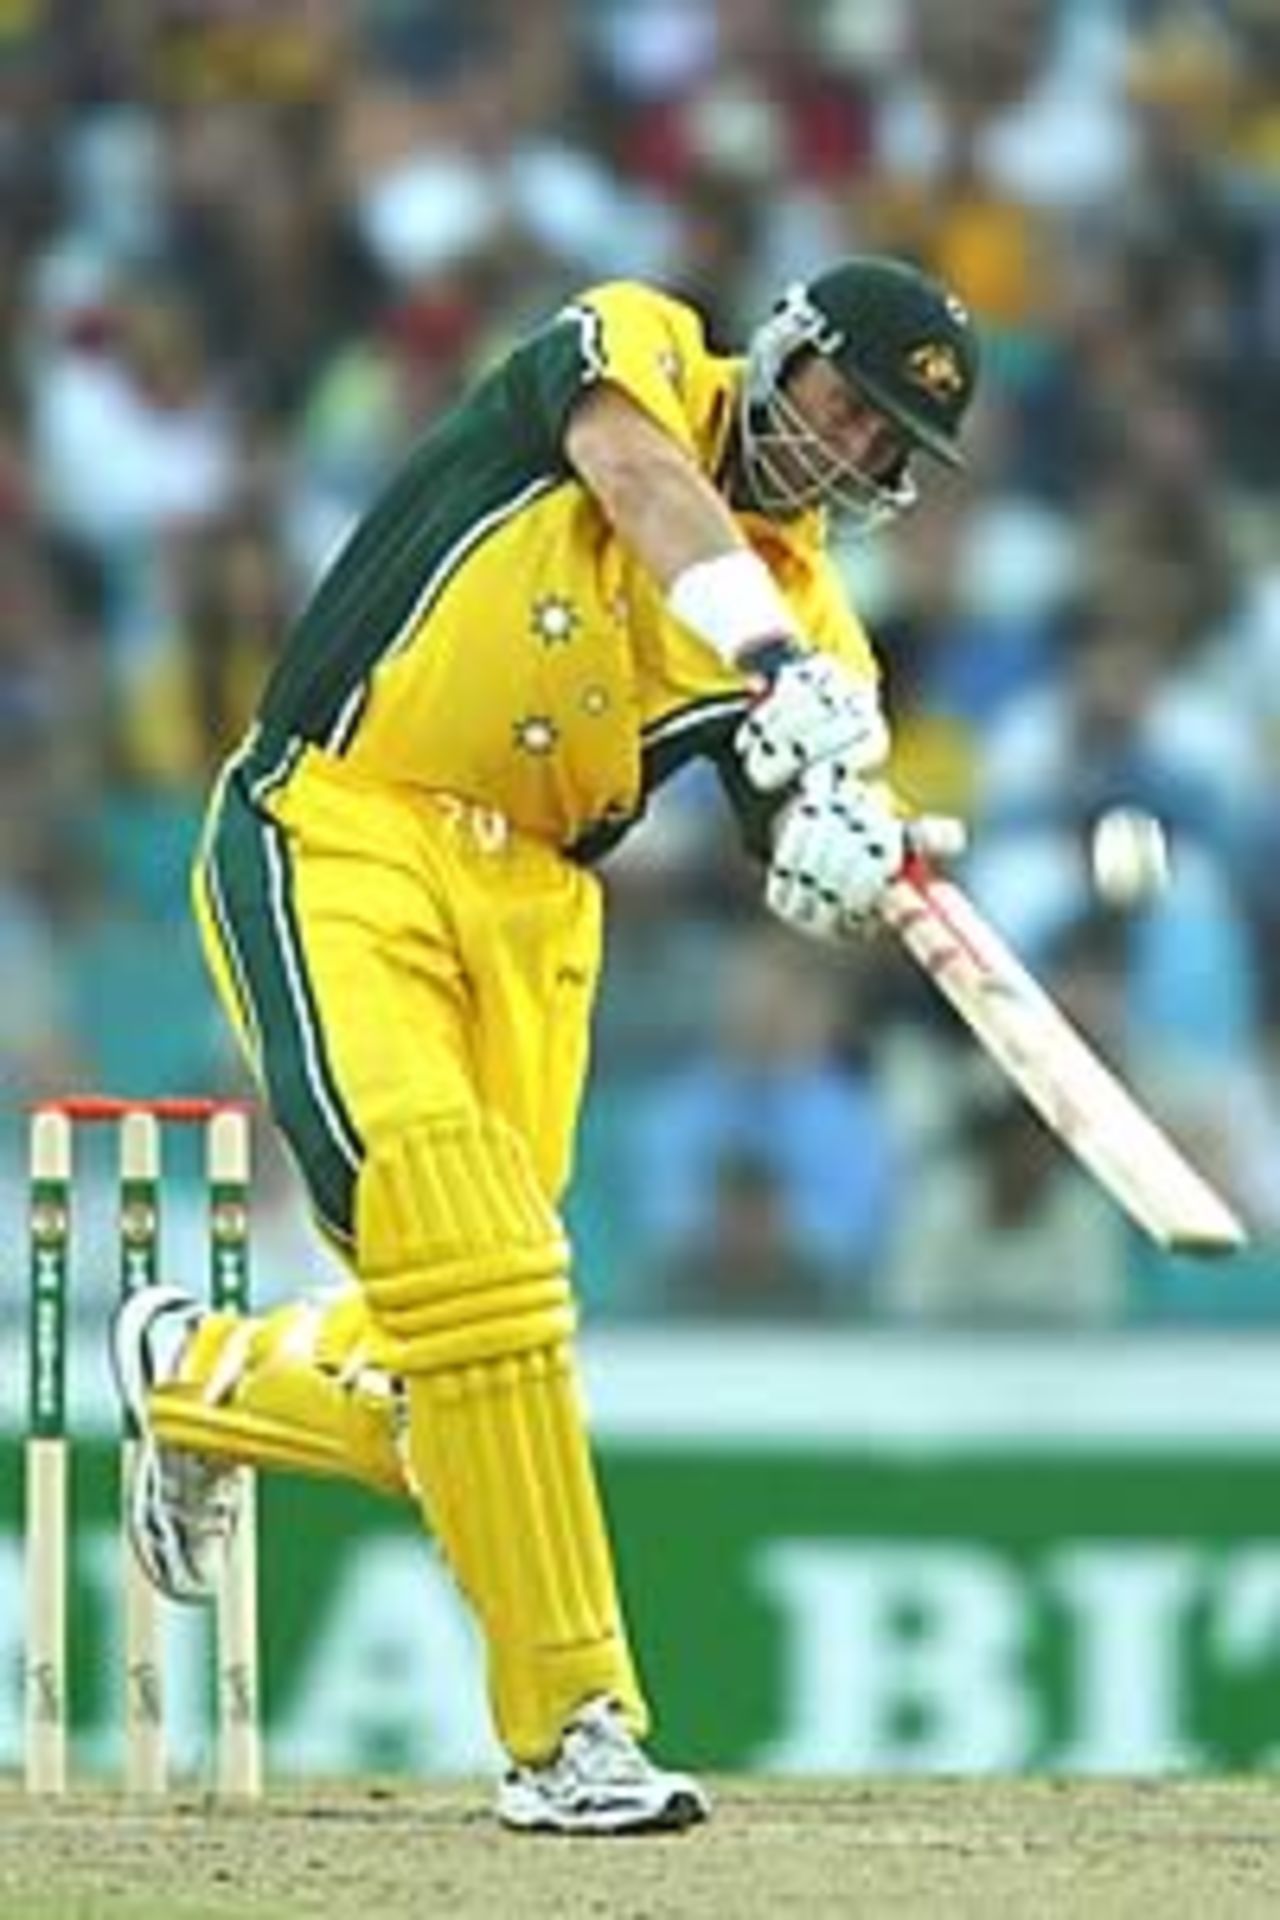 SYDNEY - DECEMBER 13: Matthew Hayden of Australia hits out during the One Day International match between Australia and England at the Sydney Cricket Ground in Sydney, Australia on December 13, 2002.